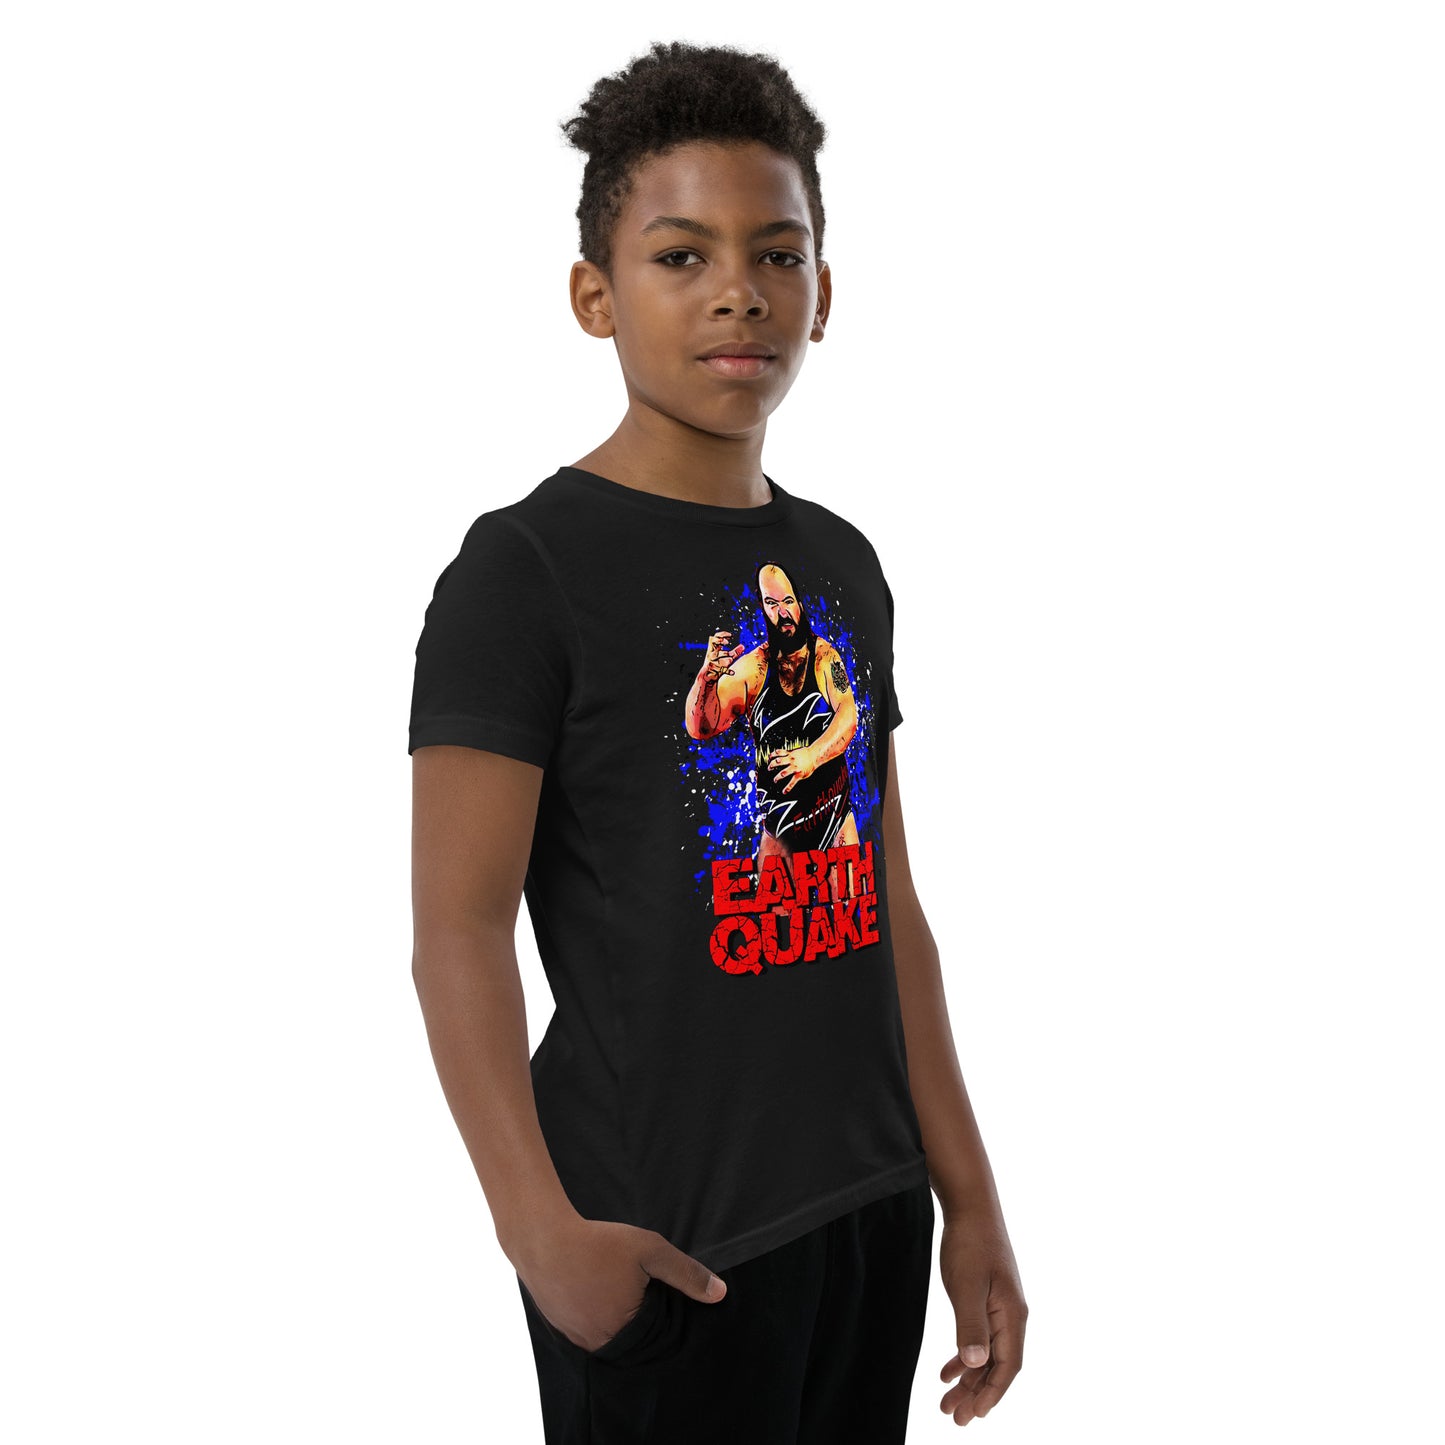 Earthquake the Wrestler Tee: Shake Up Your Wardrobe with Power